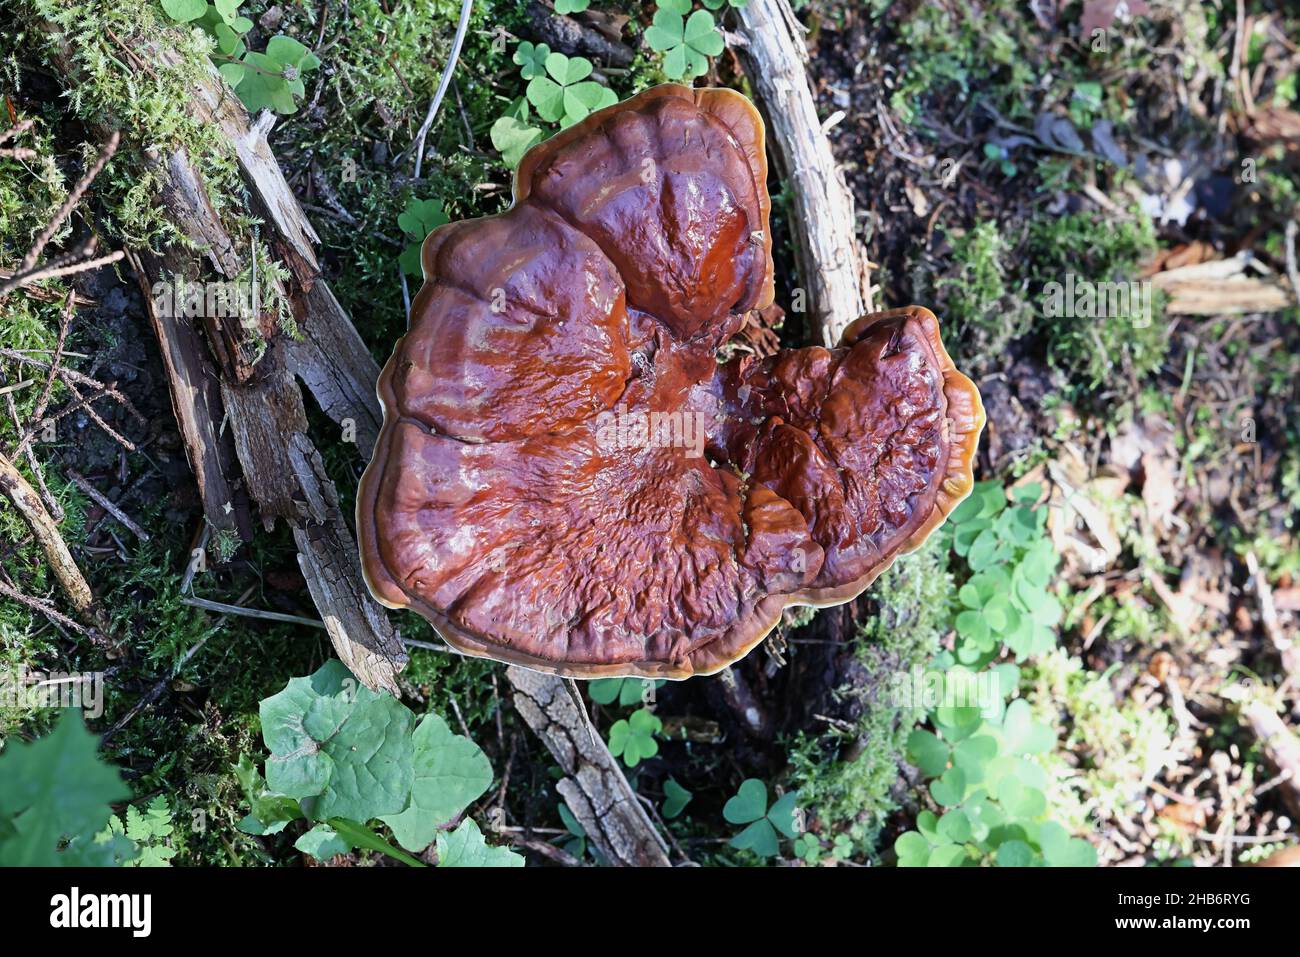 Ganoderma lucidum, commonly known as lingzhi or reishi, wild medicinal polypore fungus from Finland Stock Photo